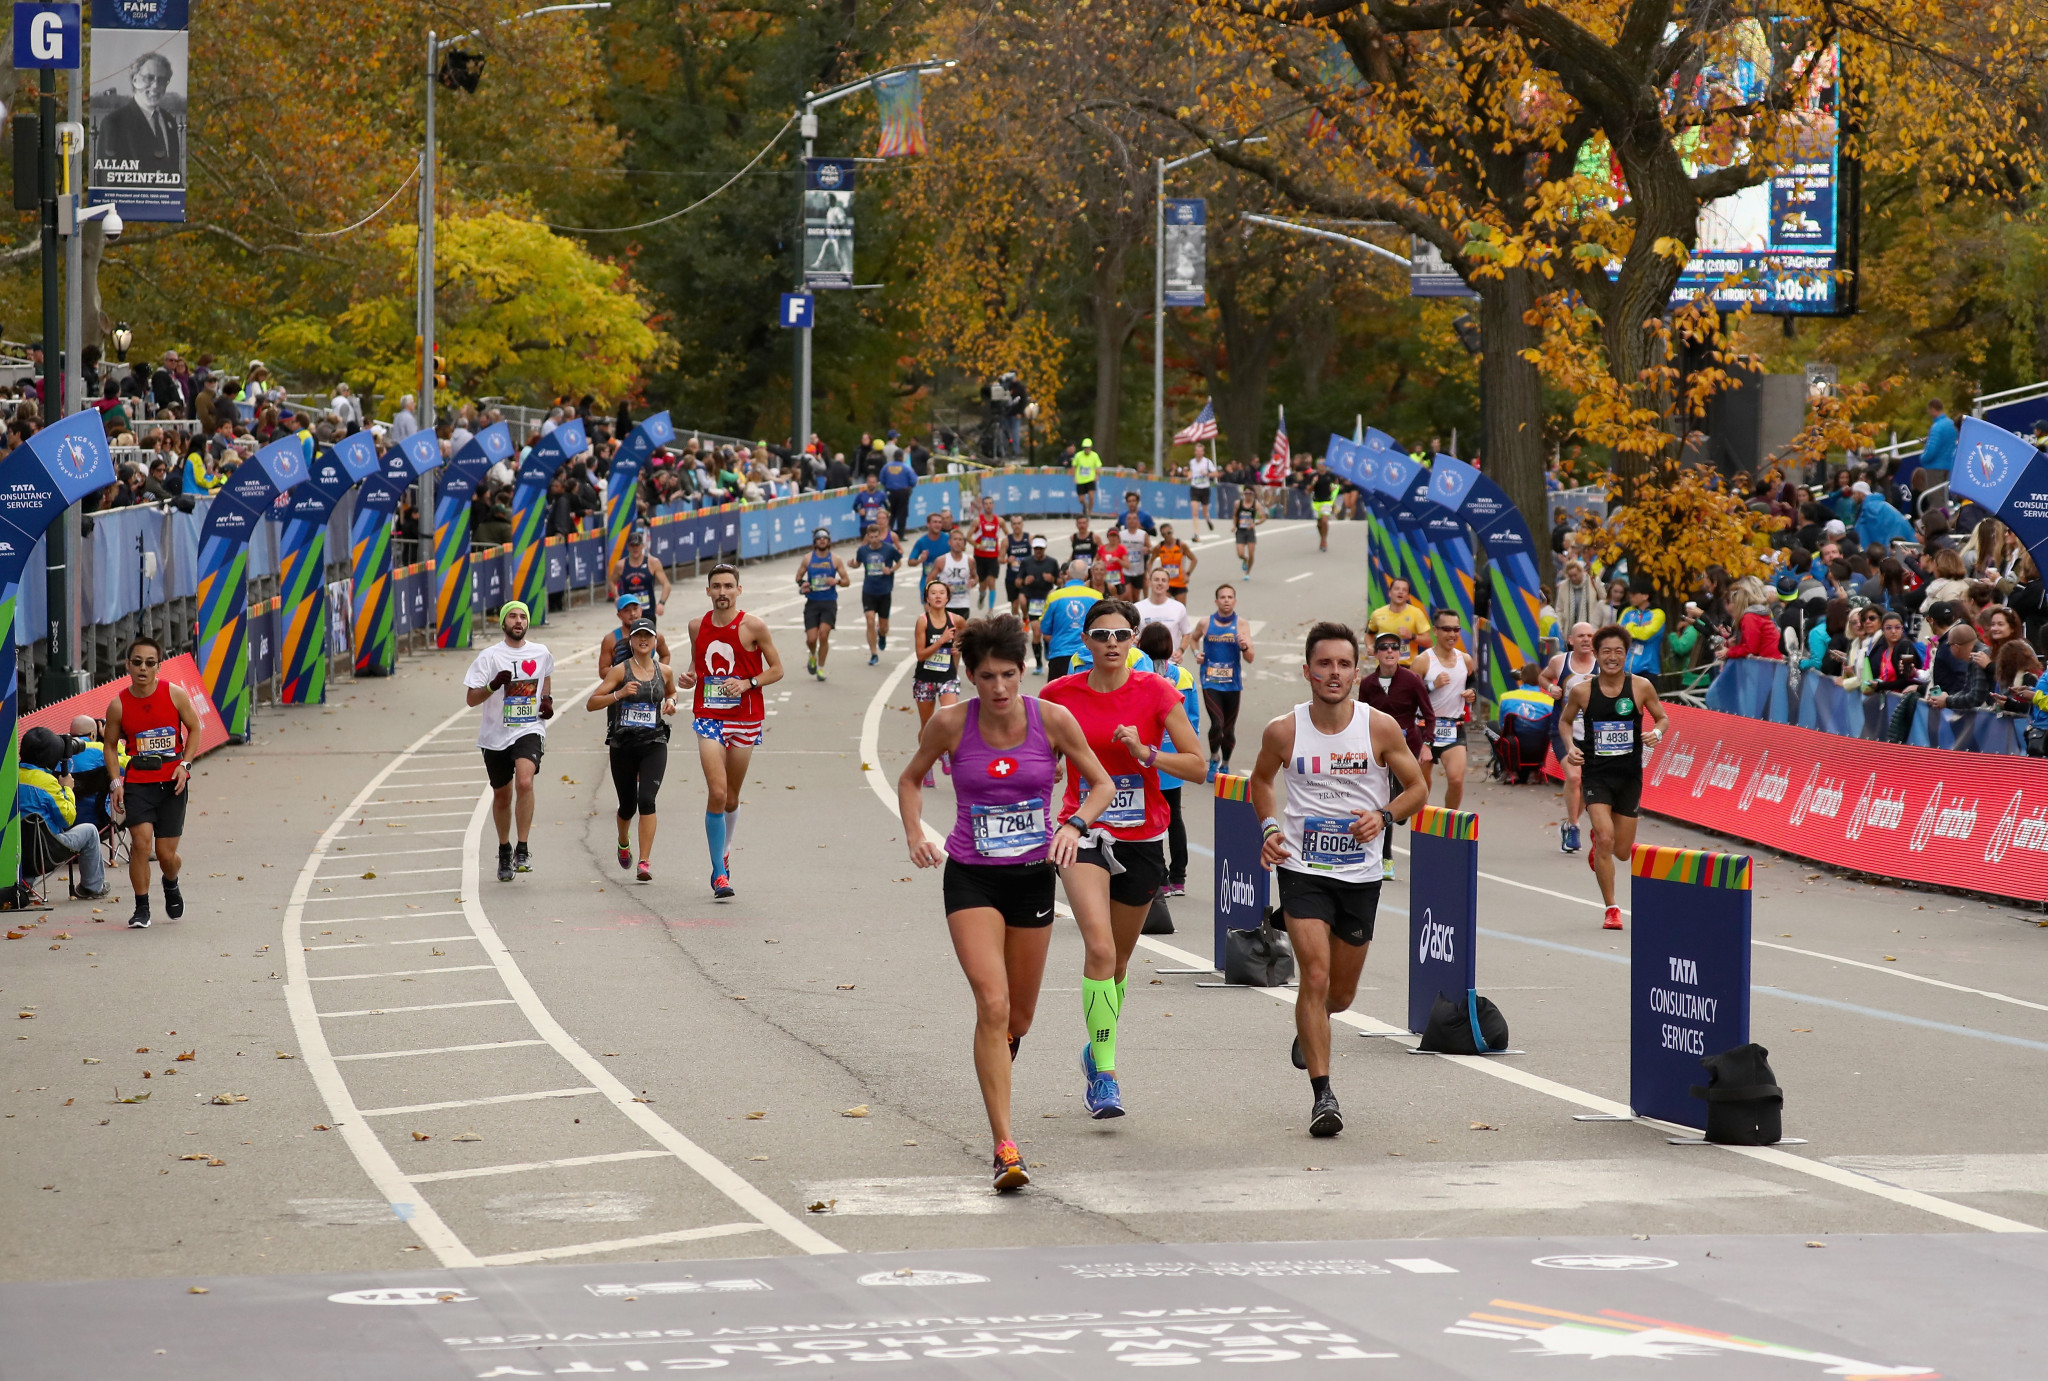 Police have said this weekend's New York City Marathon will take place amid heightened security ©Getty Images